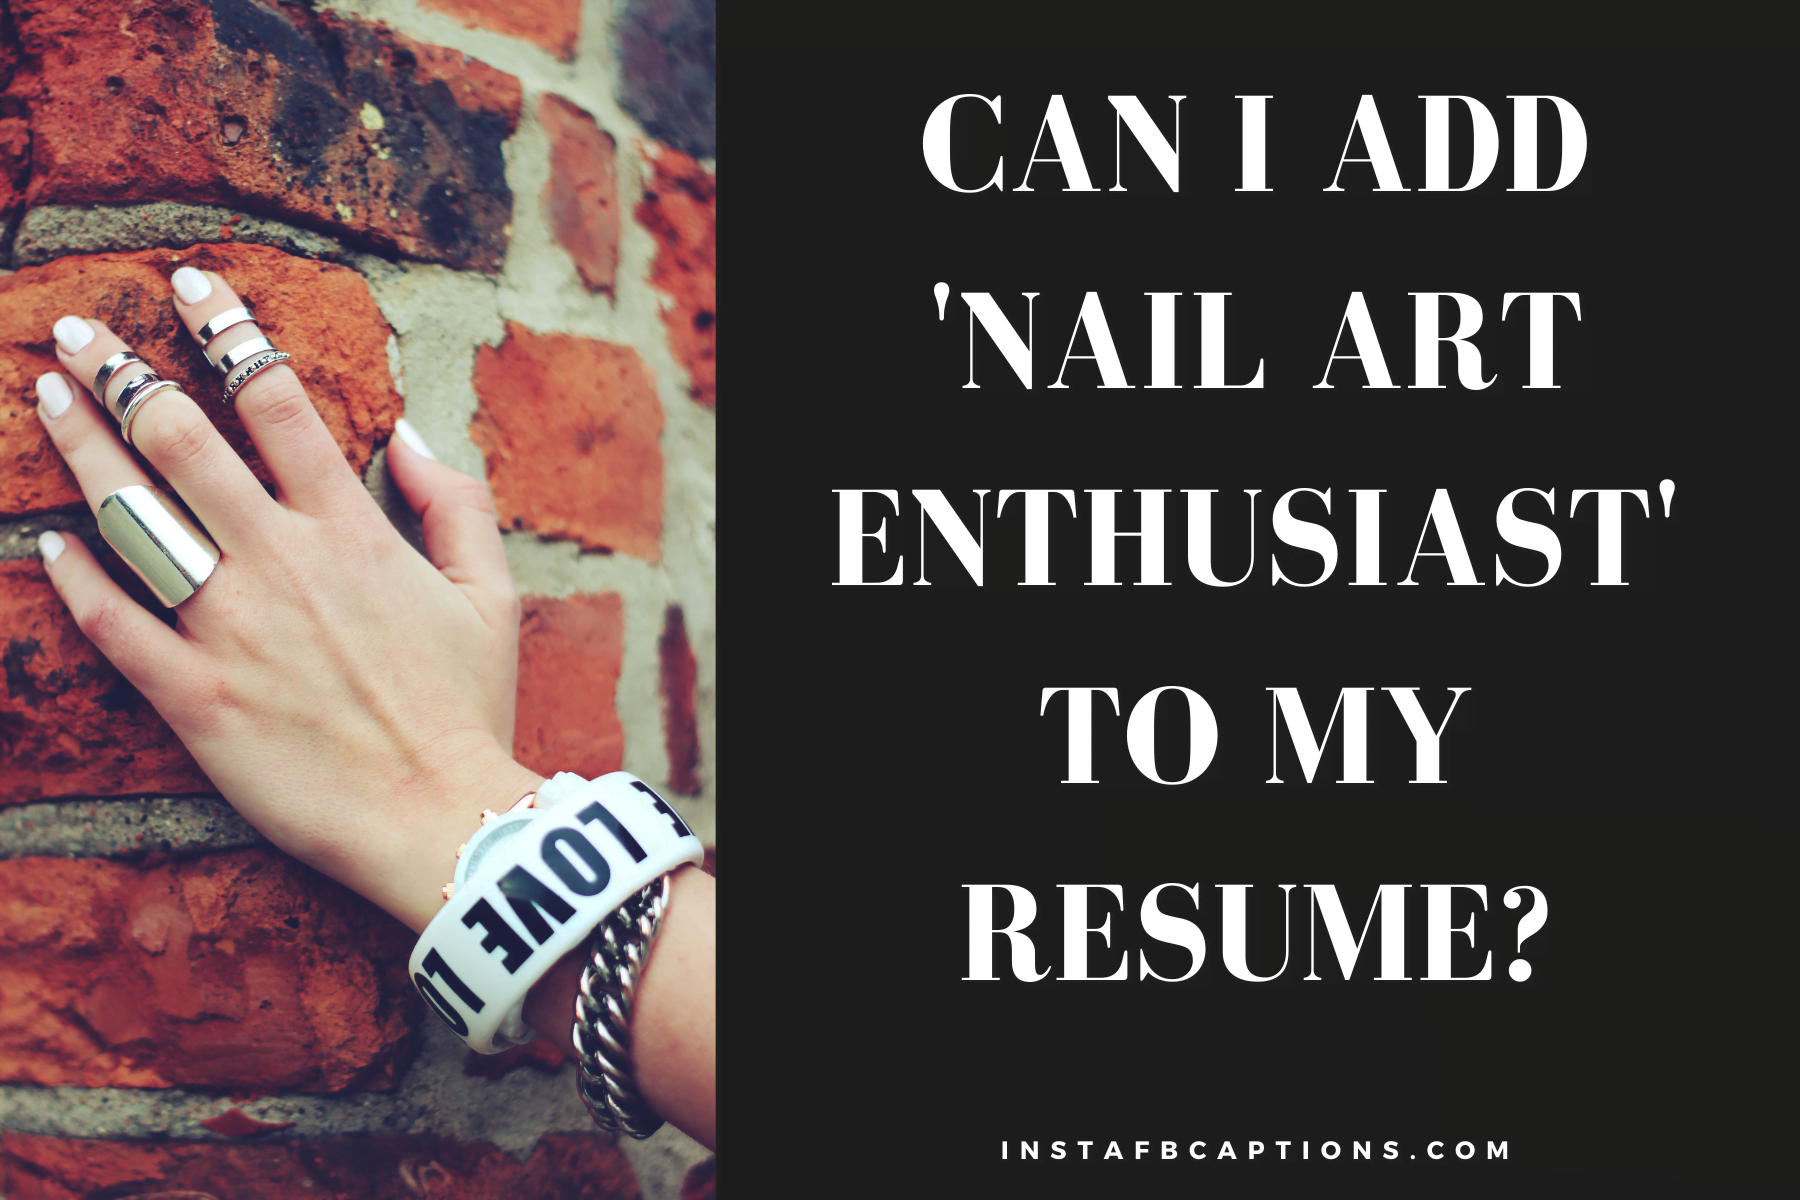 Classic Quotes On Nail Art To Use As Instagram Captions  - Classic Quotes on Nail Art to Use as Instagram Captions 1 - 92+ NAILS Instagram Captions for NailArt &#038; Manicure in 2022